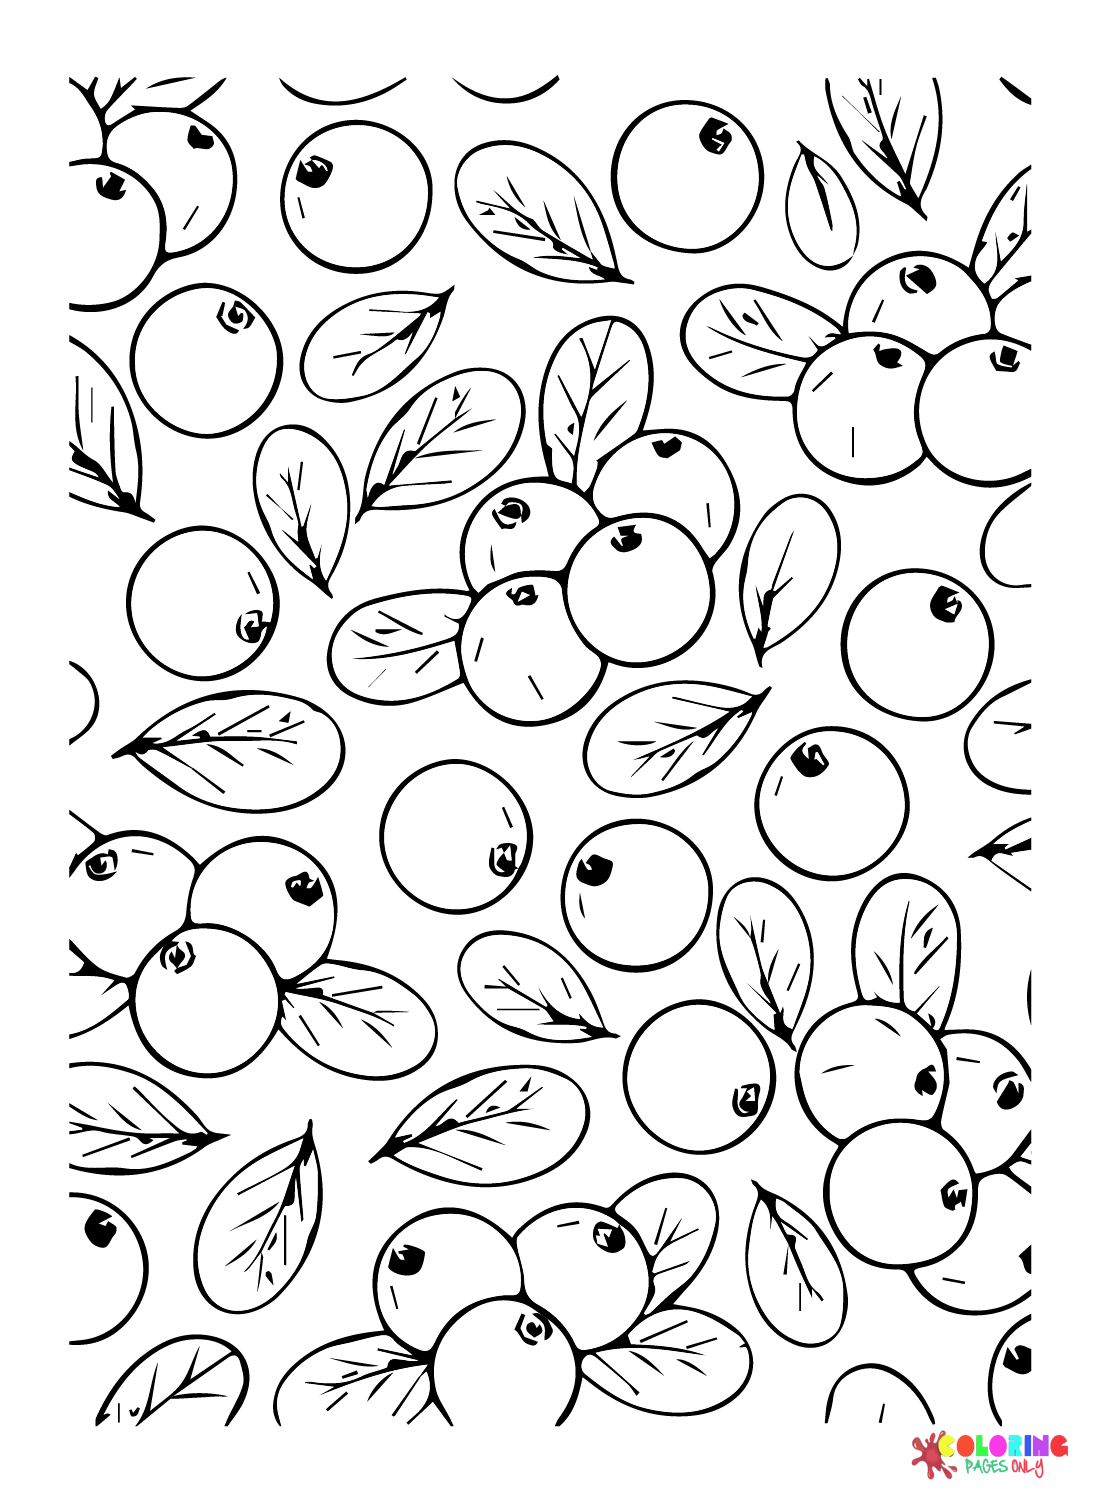 Background Blueberry Coloring Page